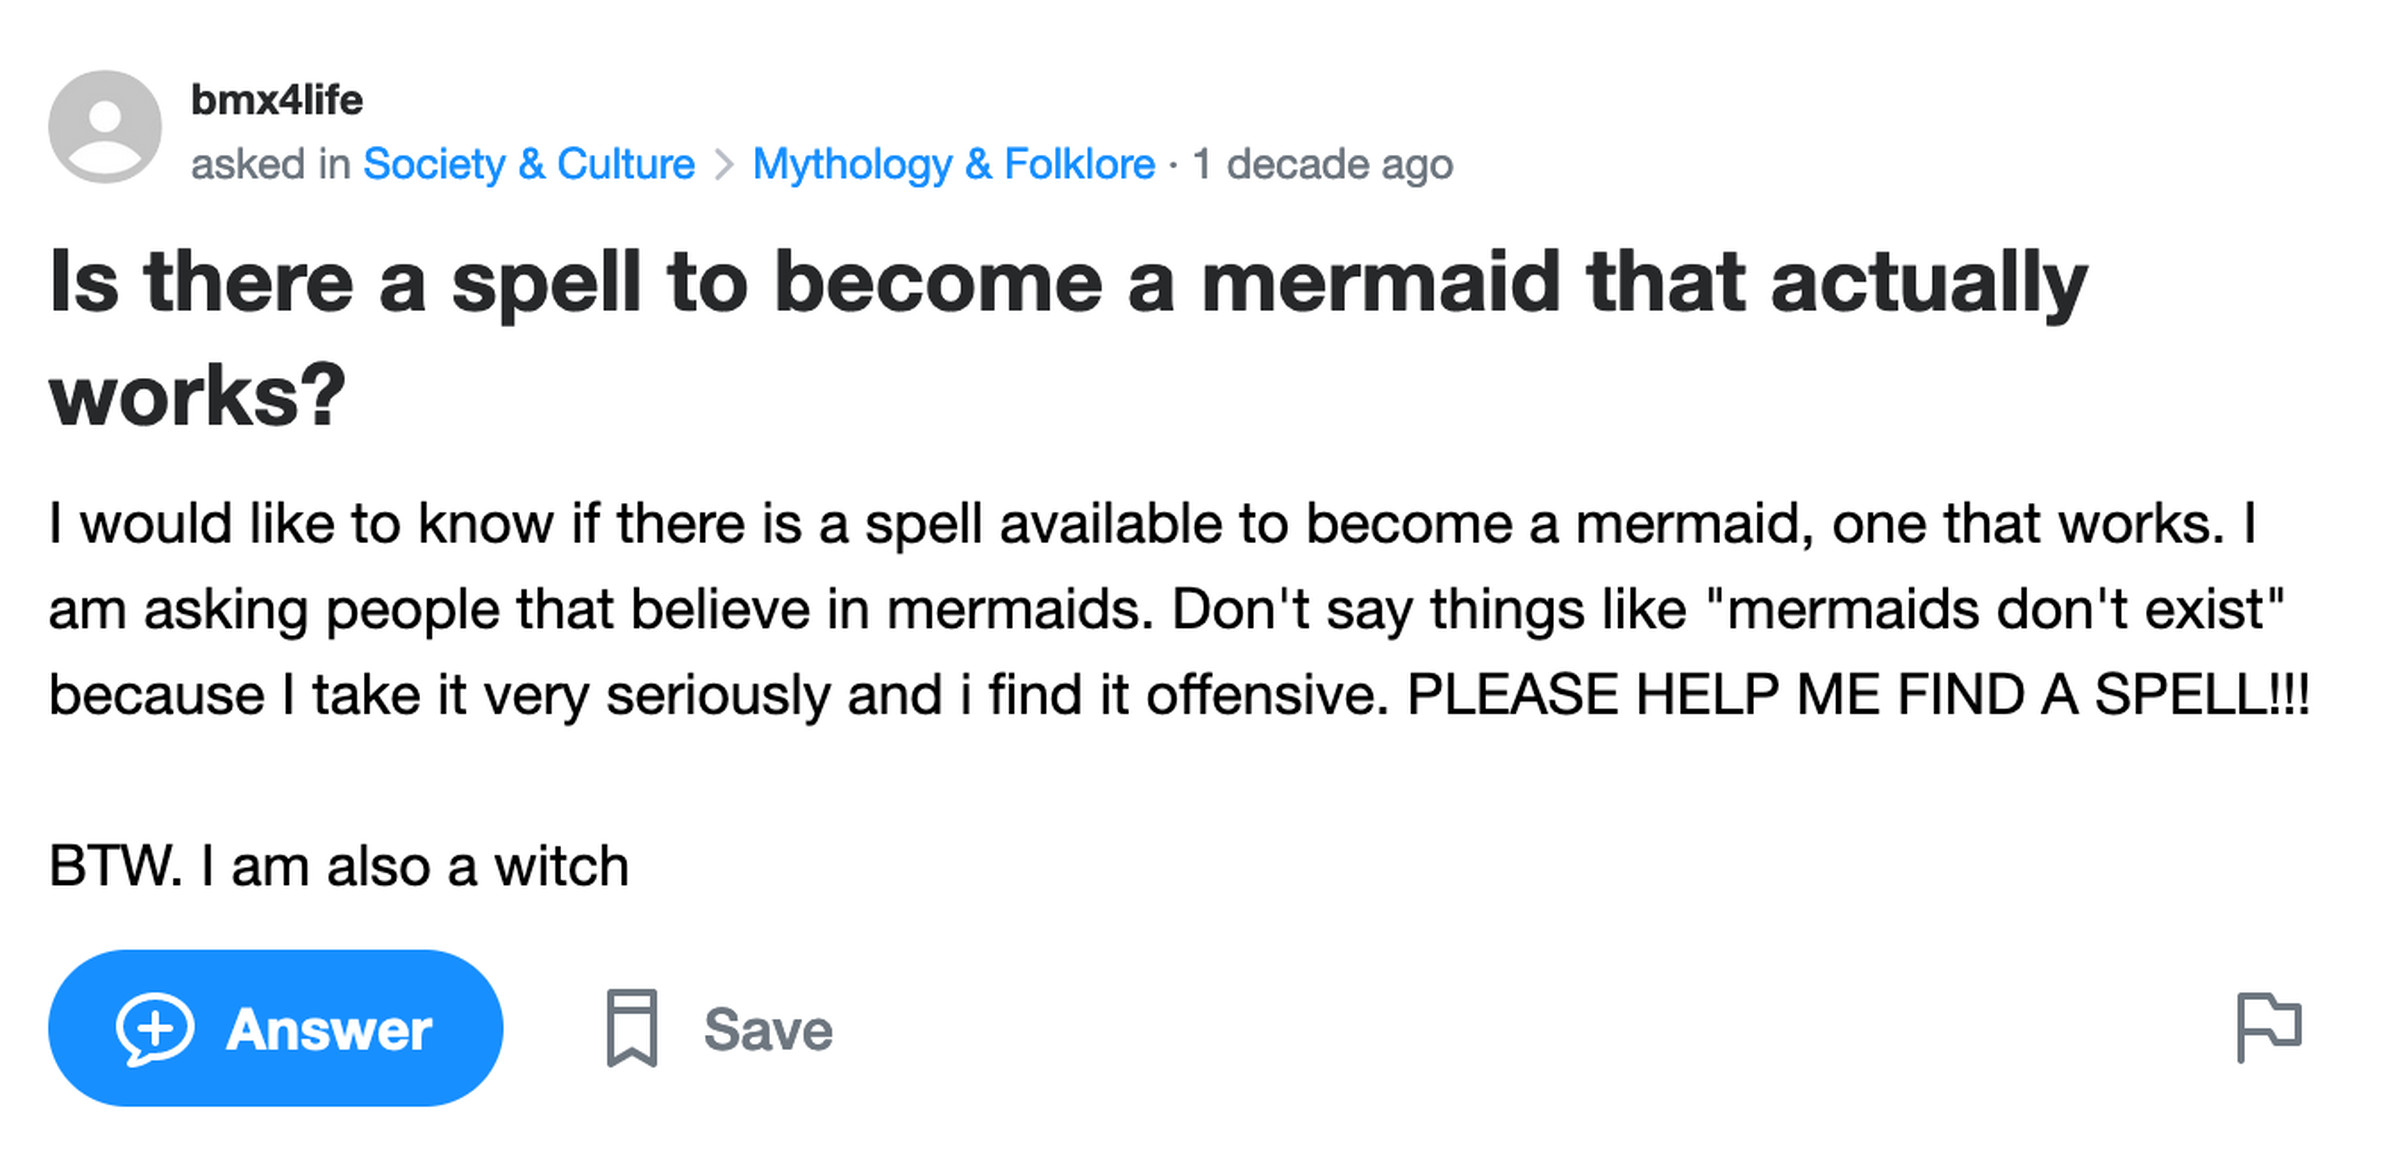 Yahoo Answers post: Is there a spell to become a mermaid that actually works? I would like to know if there is a spell available to become a mermaid, one that works. I am asking people that believe in mermaids. Don’t say things like “mermaids don’t exist” because I take it very seriously and i find it offensive. PLEASE HELP ME FIND A SPELL!!! BTW. I am also a witch